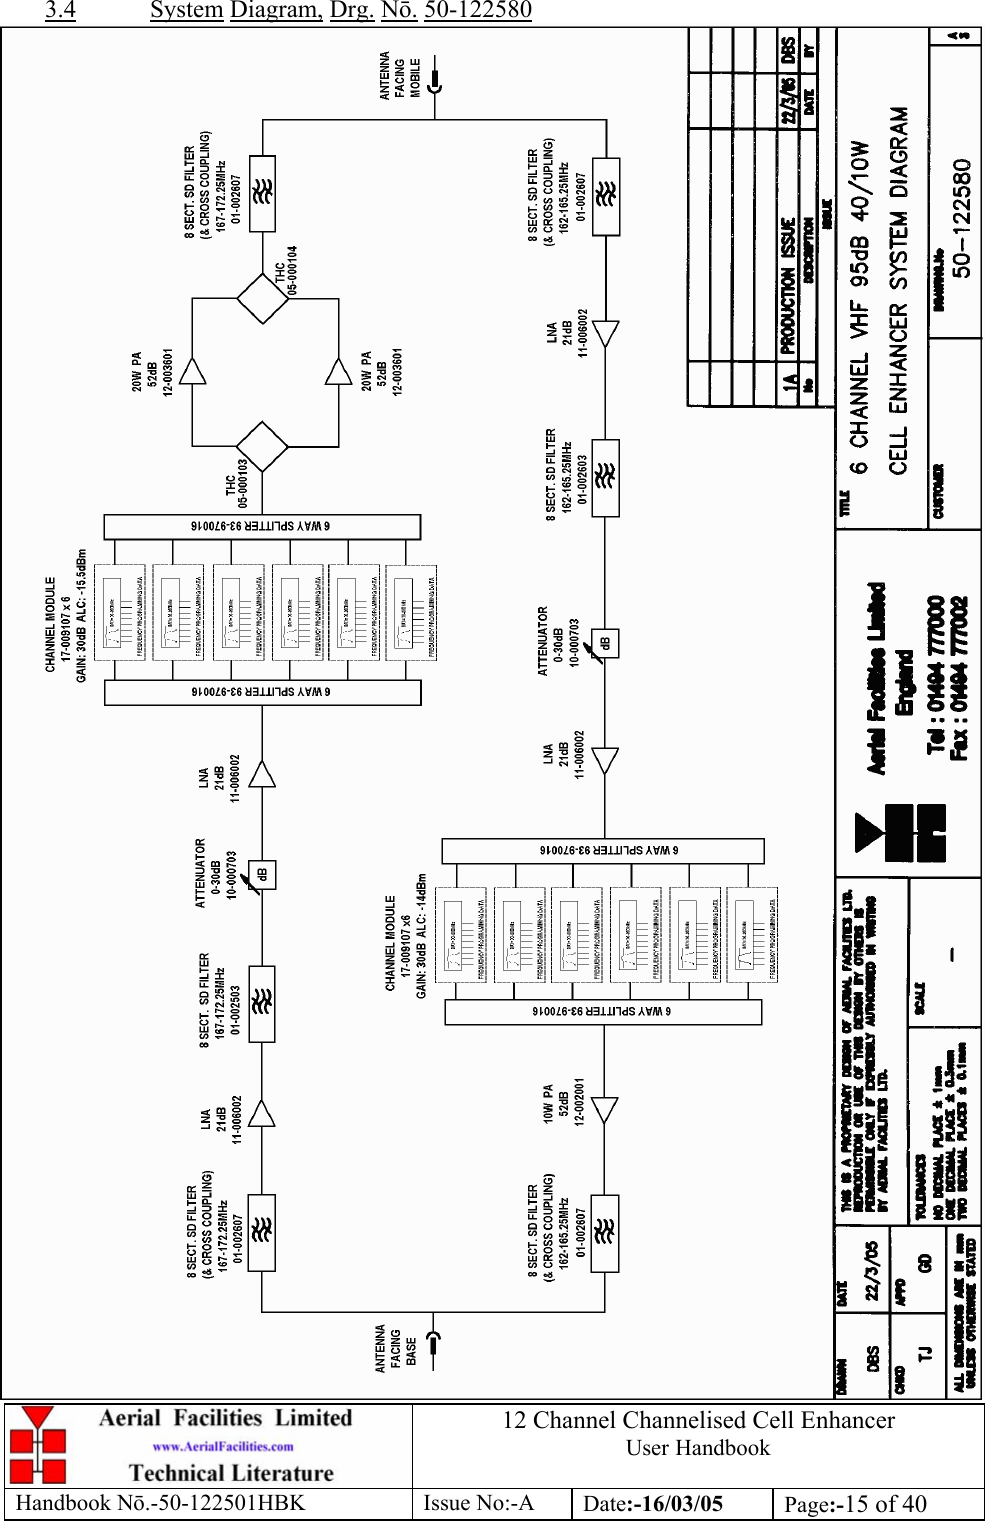 12 Channel Channelised Cell Enhancer User Handbook Handbook N.-50-122501HBK Issue No:-A Date:-16/03/05  Page:-15 of 40  3.4 System Diagram, Drg. N. 50-122580  